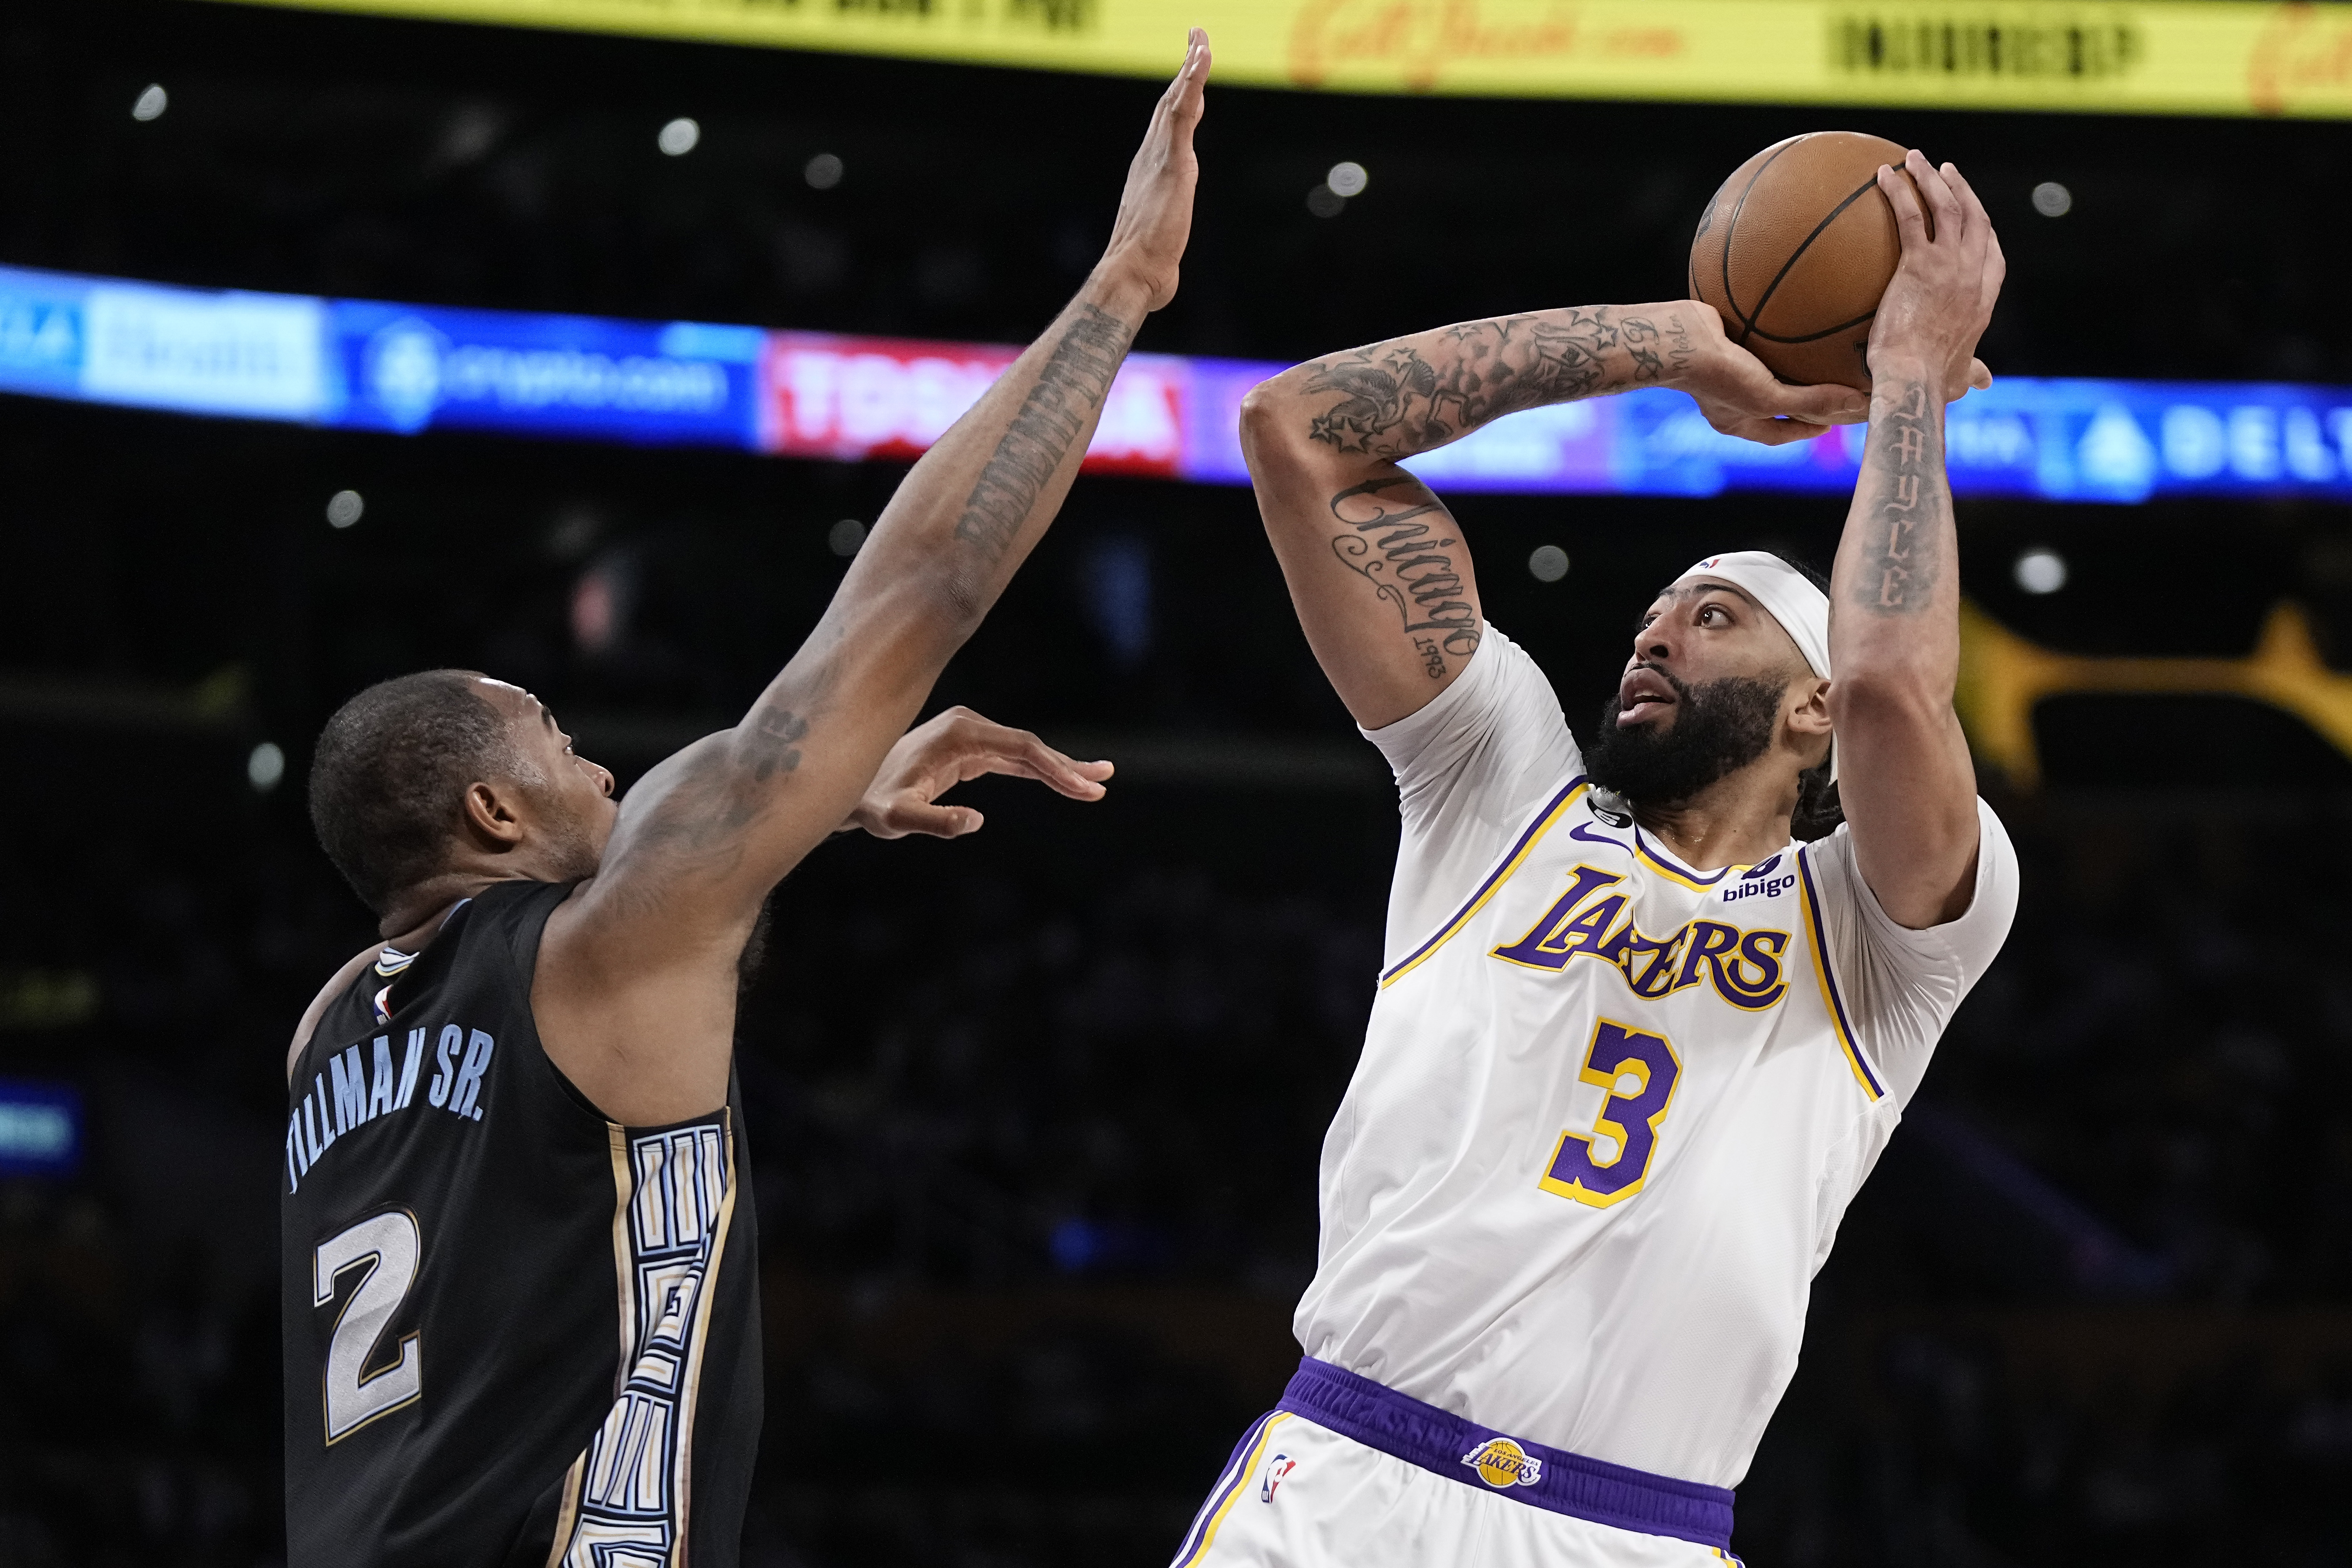 lakers game live stream free